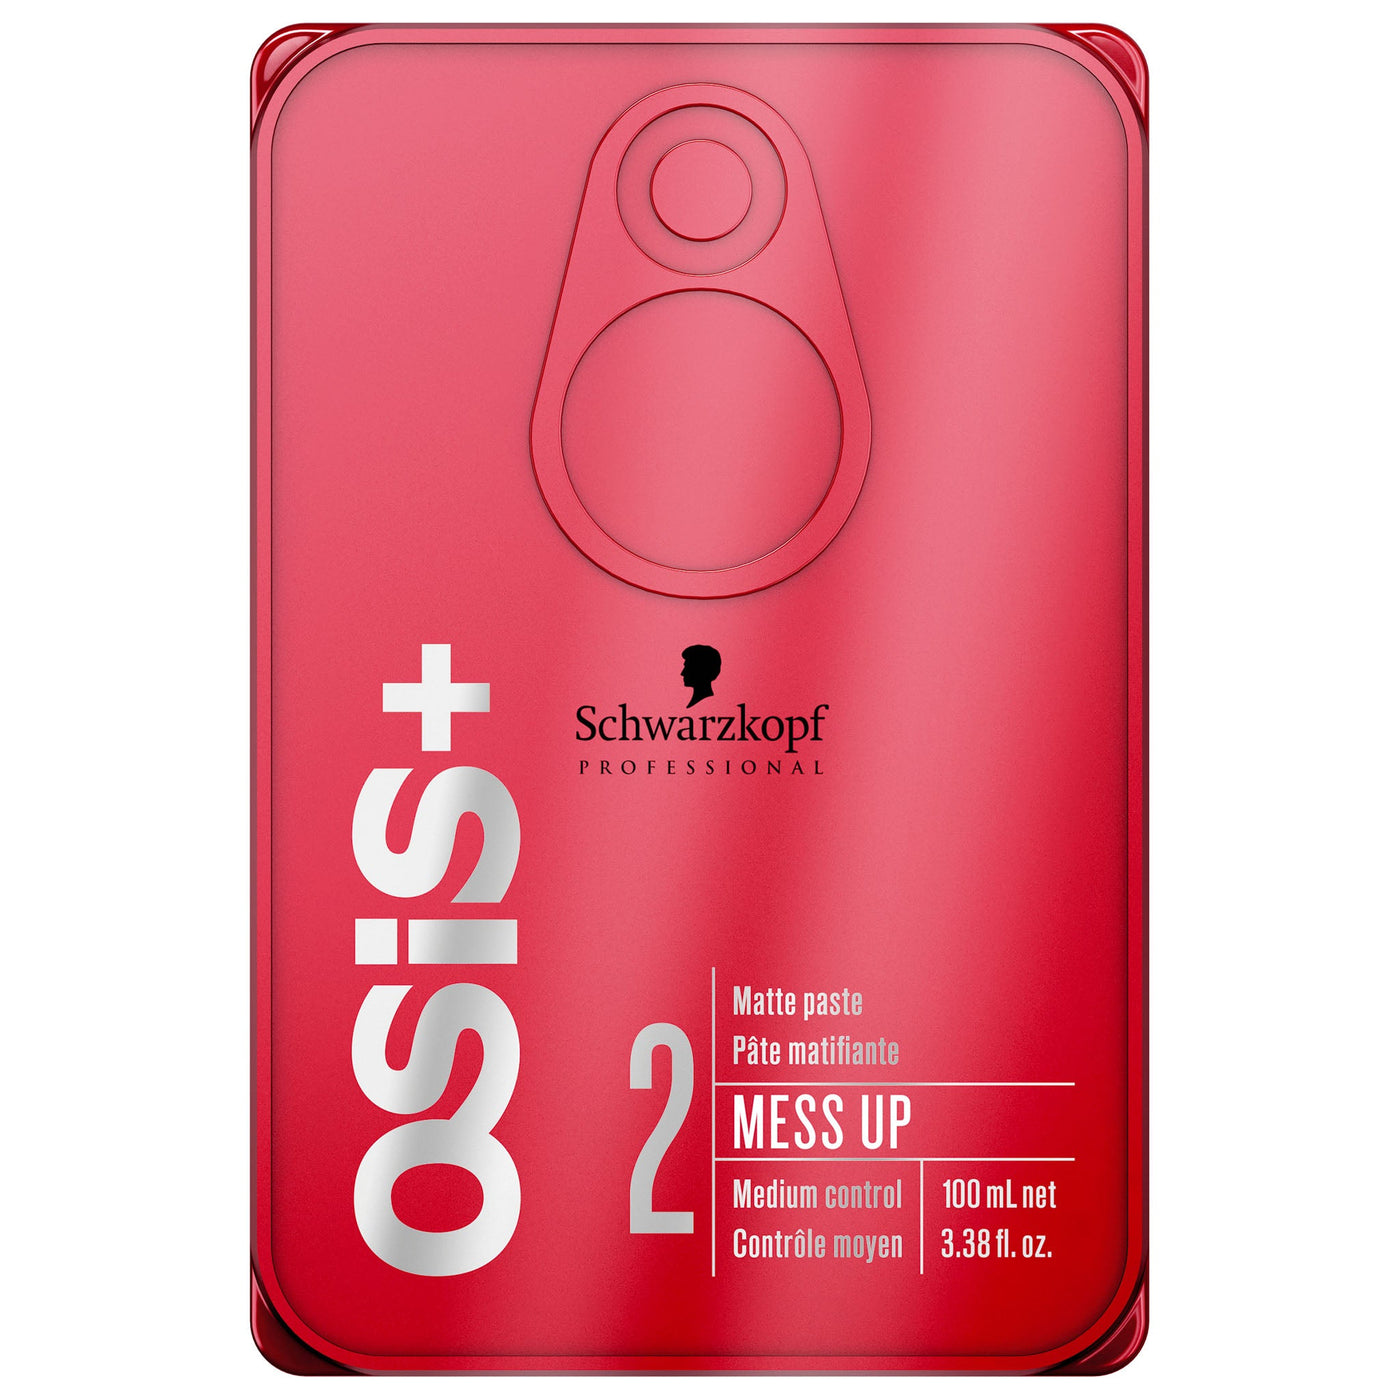 Schwarzkopf Professional OSiS+ Mess Up - Matte Paste For Messy Styles (100ml)